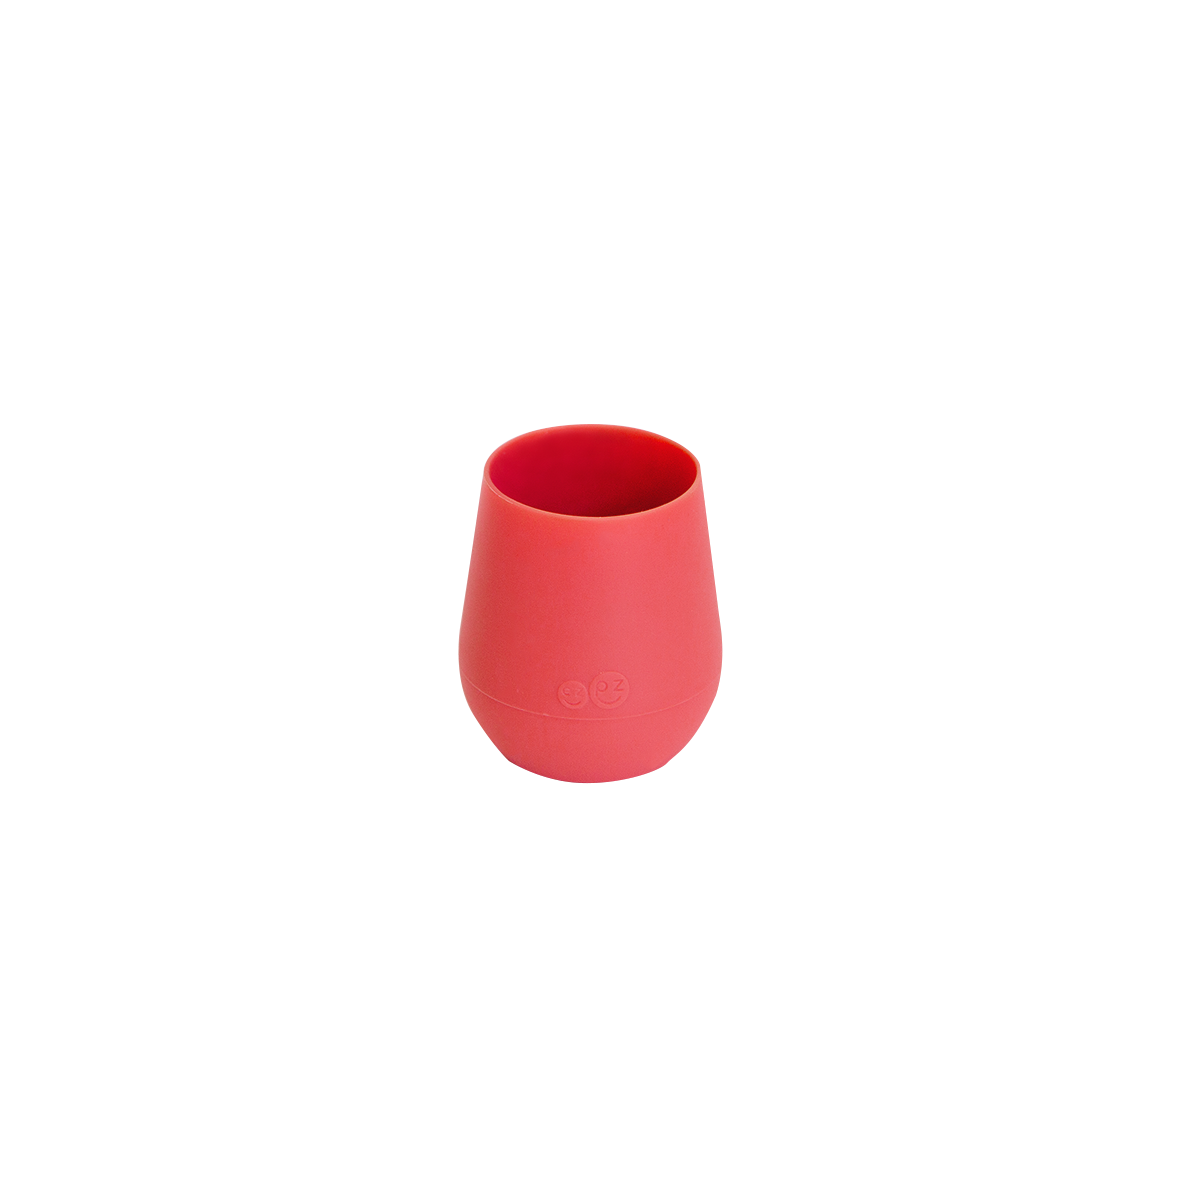 EzPz Tiny Cup - Coral